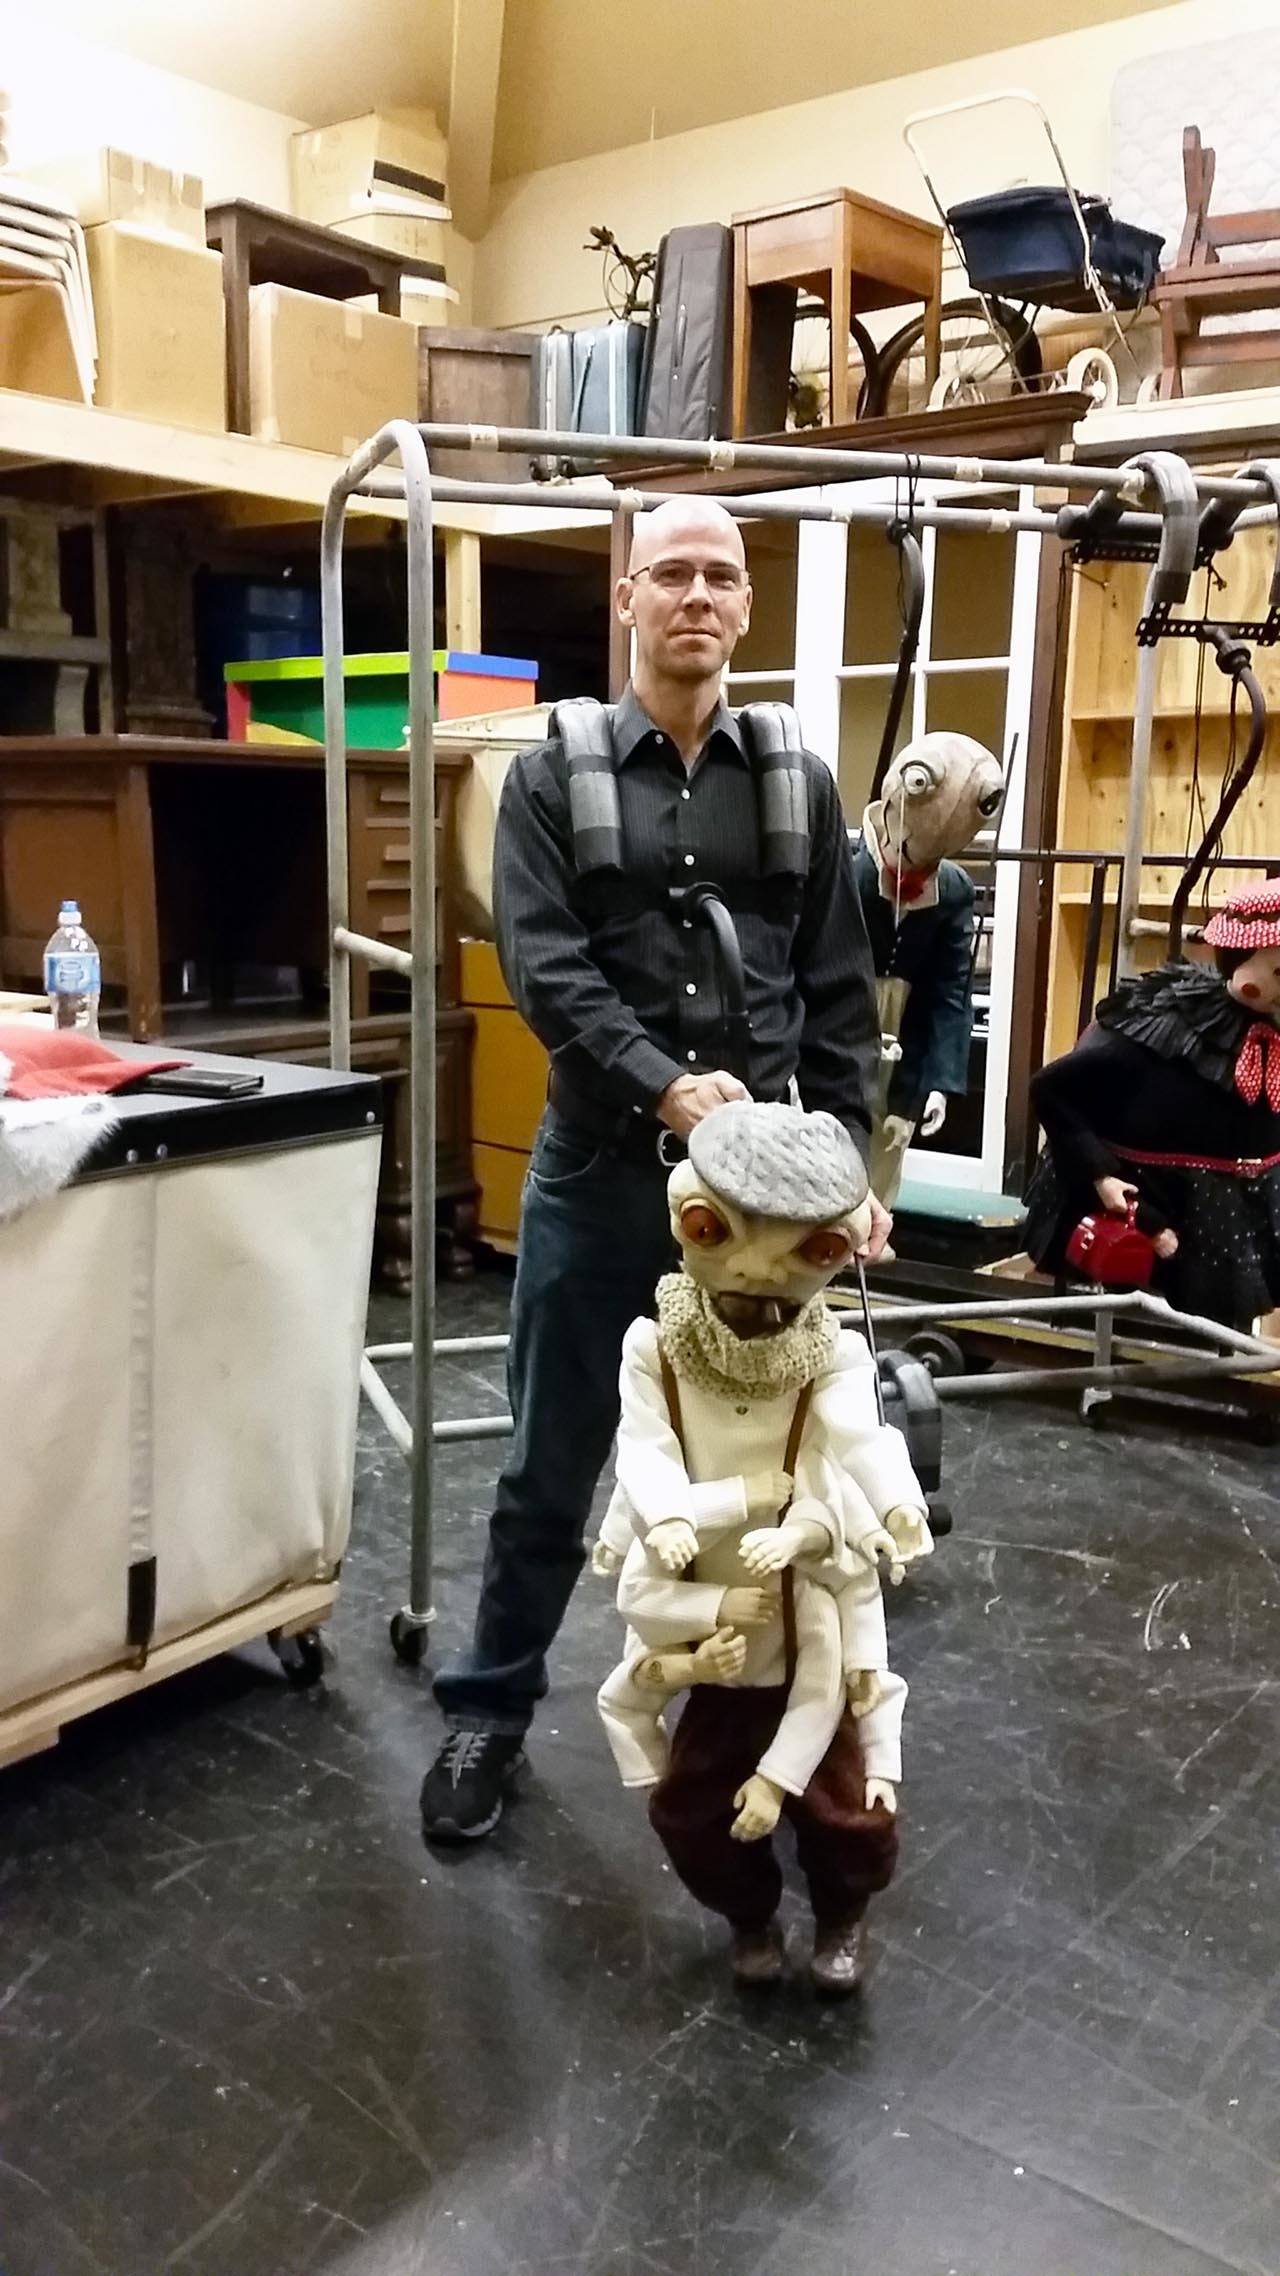 Jason Kramer demonstrates how an actor uses one of the puppets he designed for “James and the Giant Peach.” (Terri Harber|The Daily World)